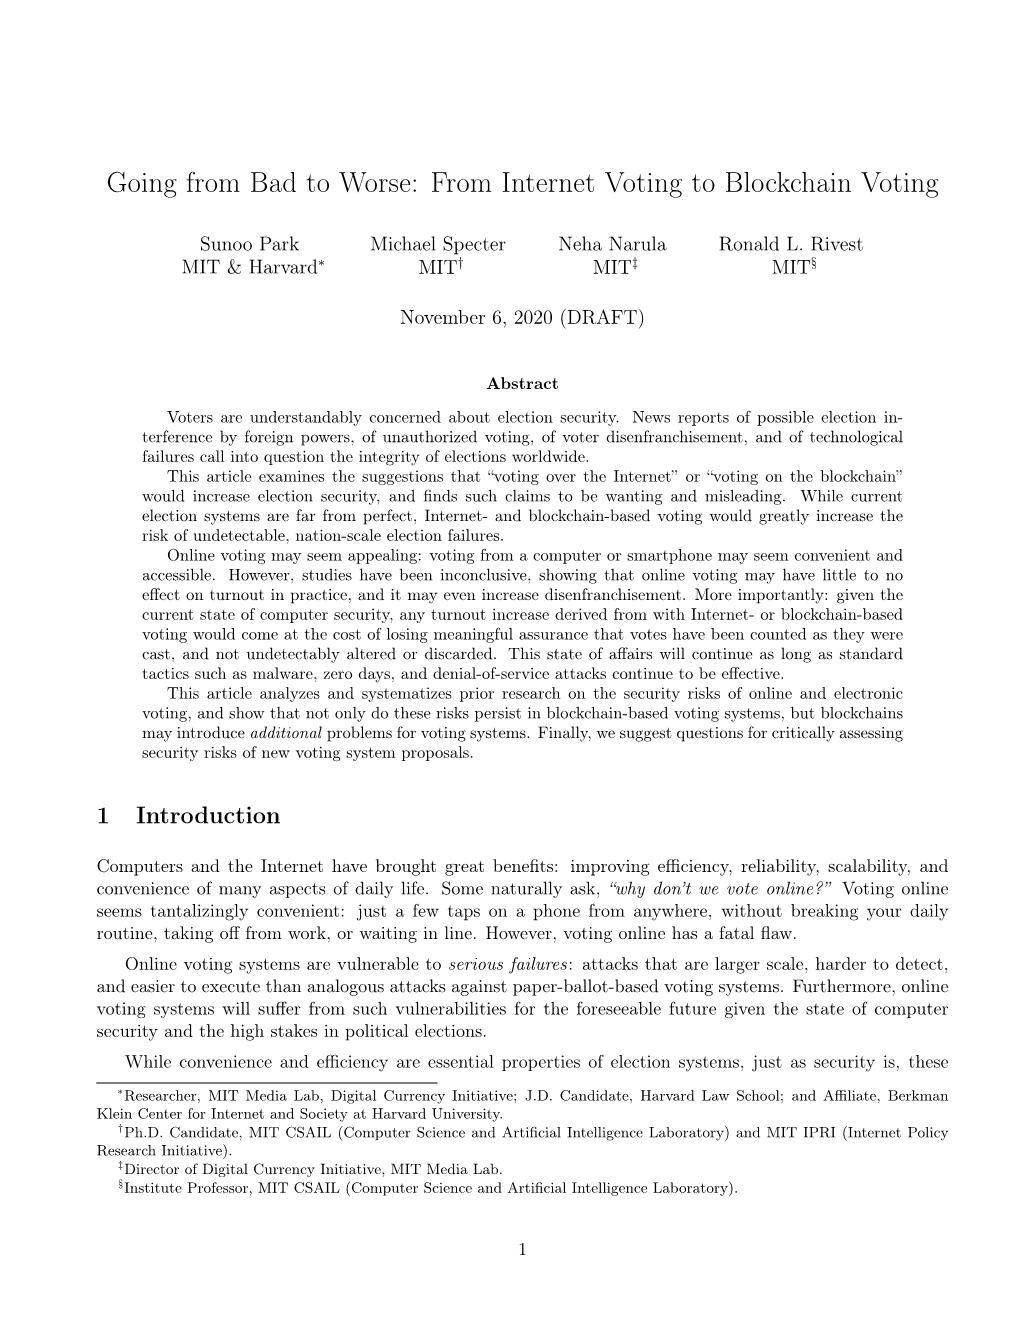 Going from Bad to Worse: from Internet Voting to Blockchain Voting